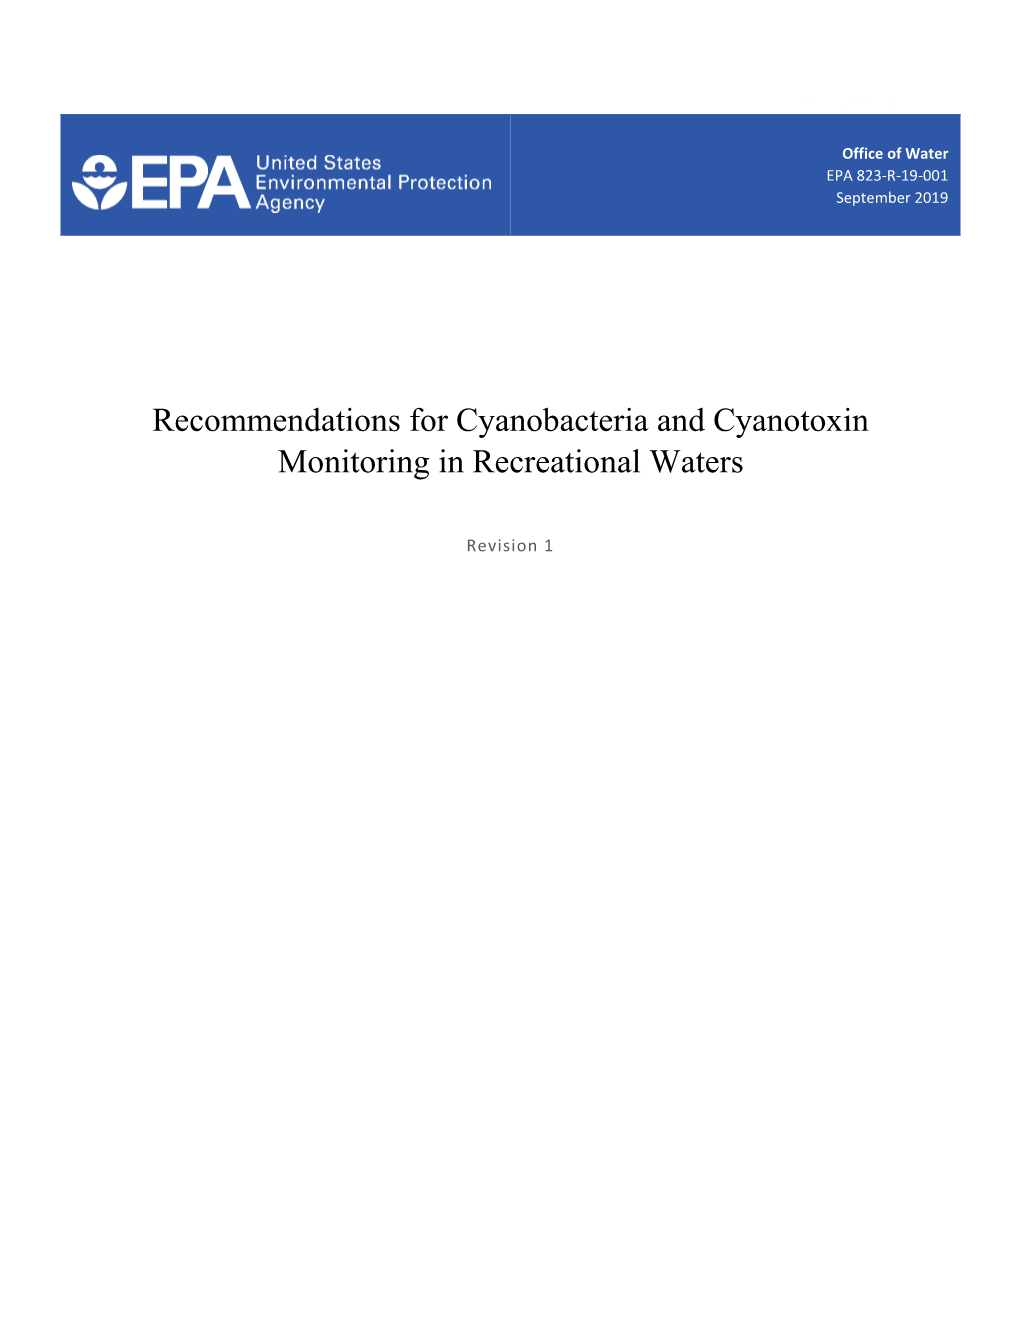 Recommendations for Cyanobacteria and Cyanotoxin Monitoring in Recreational Waters